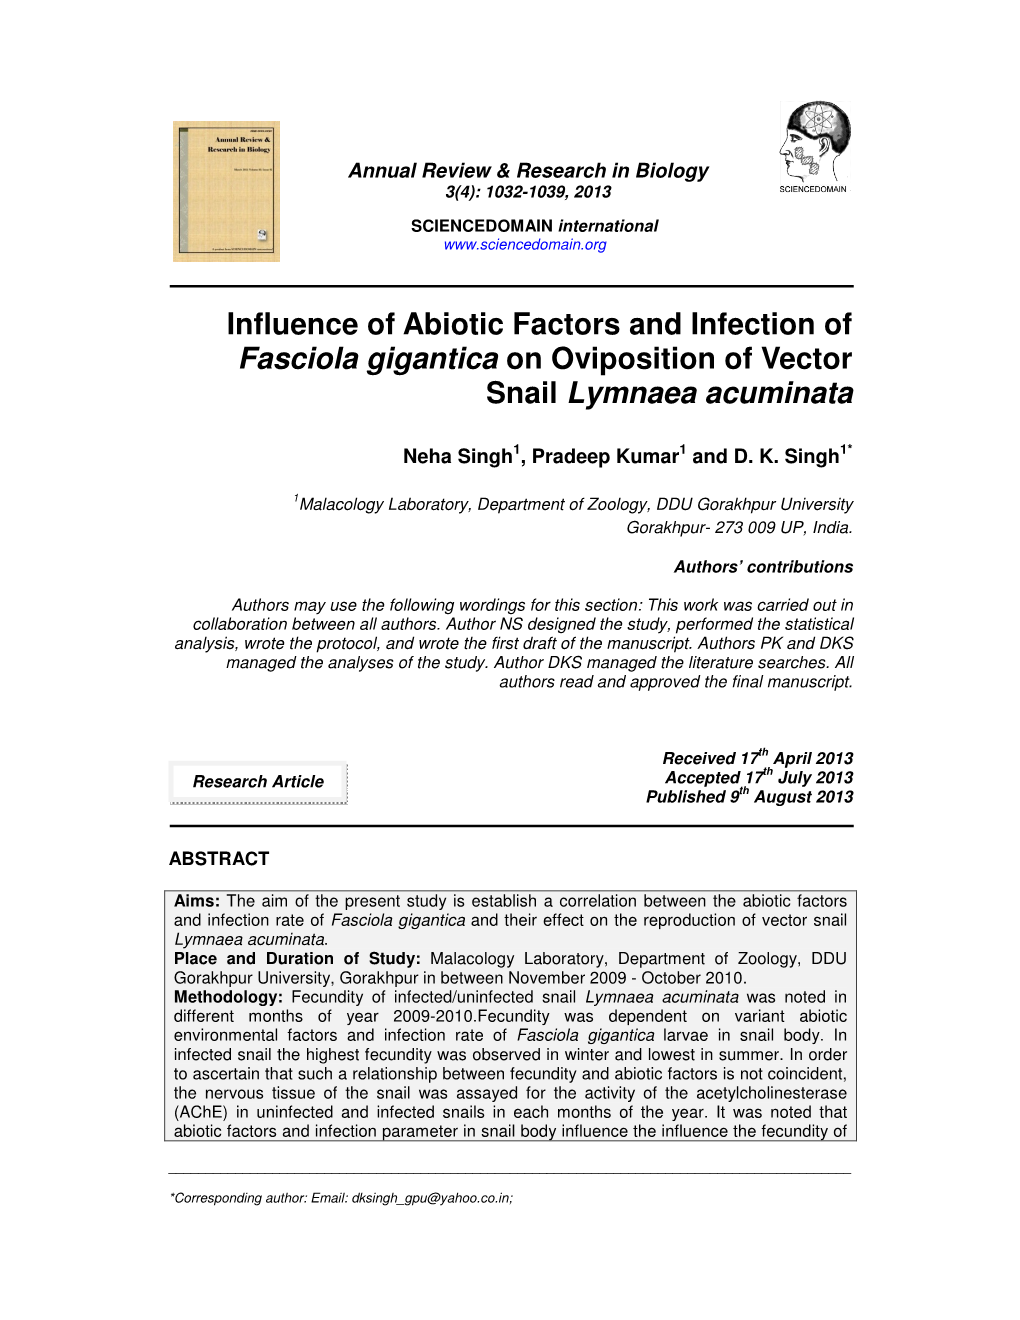 Influence of Abiotic Factors and Infection of Fasciola Gigantica on Oviposition of Vector Snail Lymnaea Acuminata